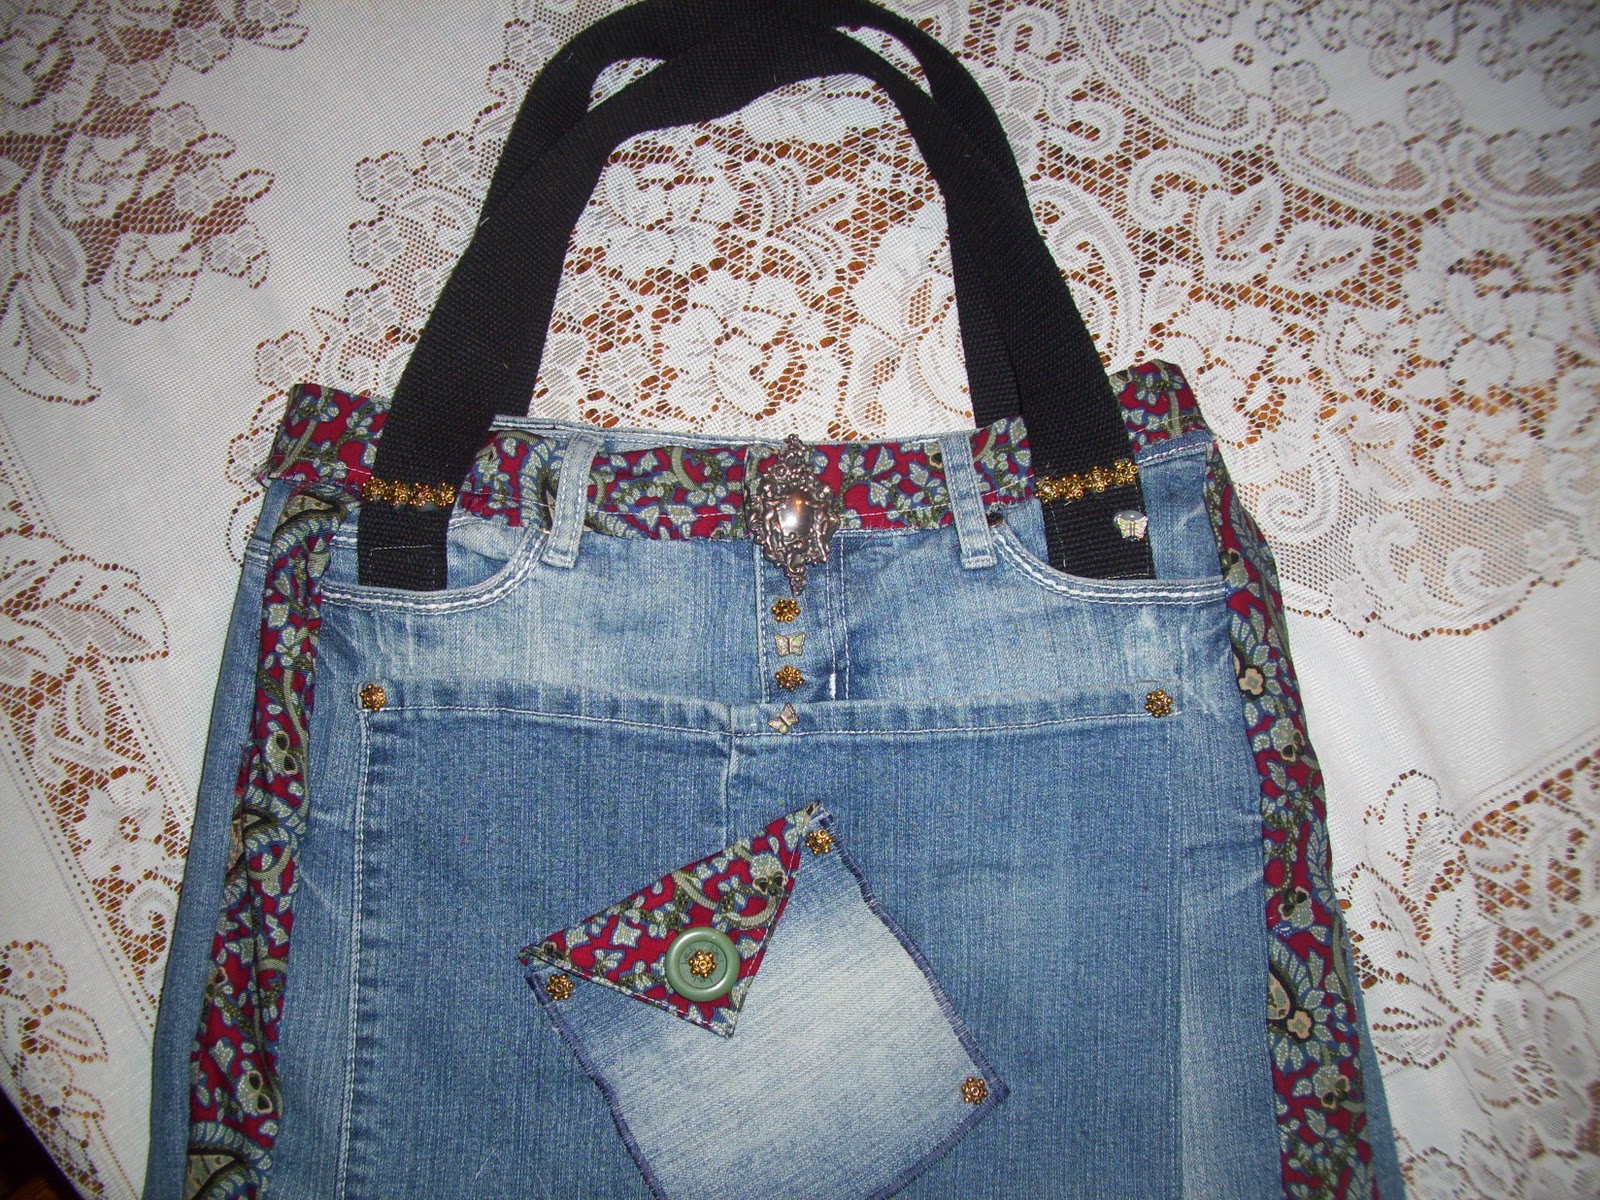 Where Your Treasure Is: Weekly Project: Blue Jean Purse